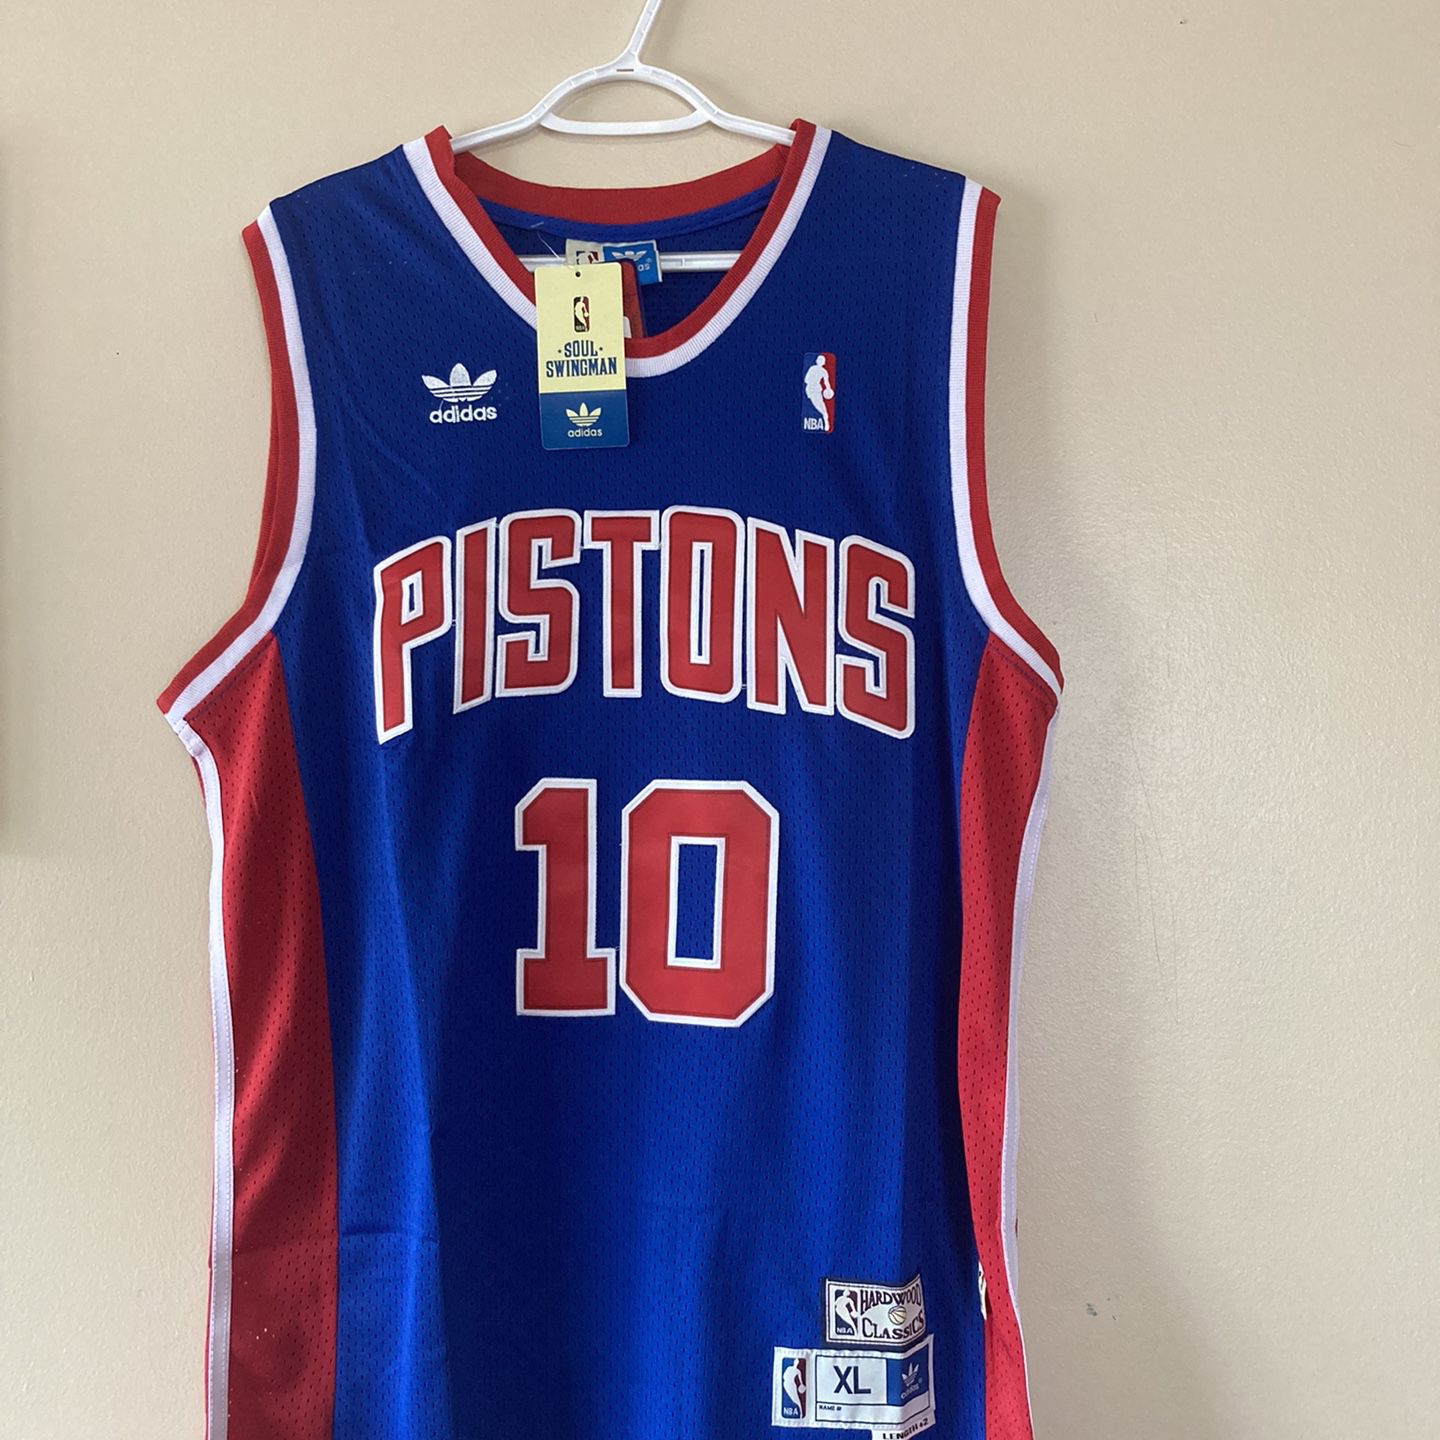 Dennis Rodman Youth Large 14-16 Champion Jersey for Sale in Gurnee, IL -  OfferUp